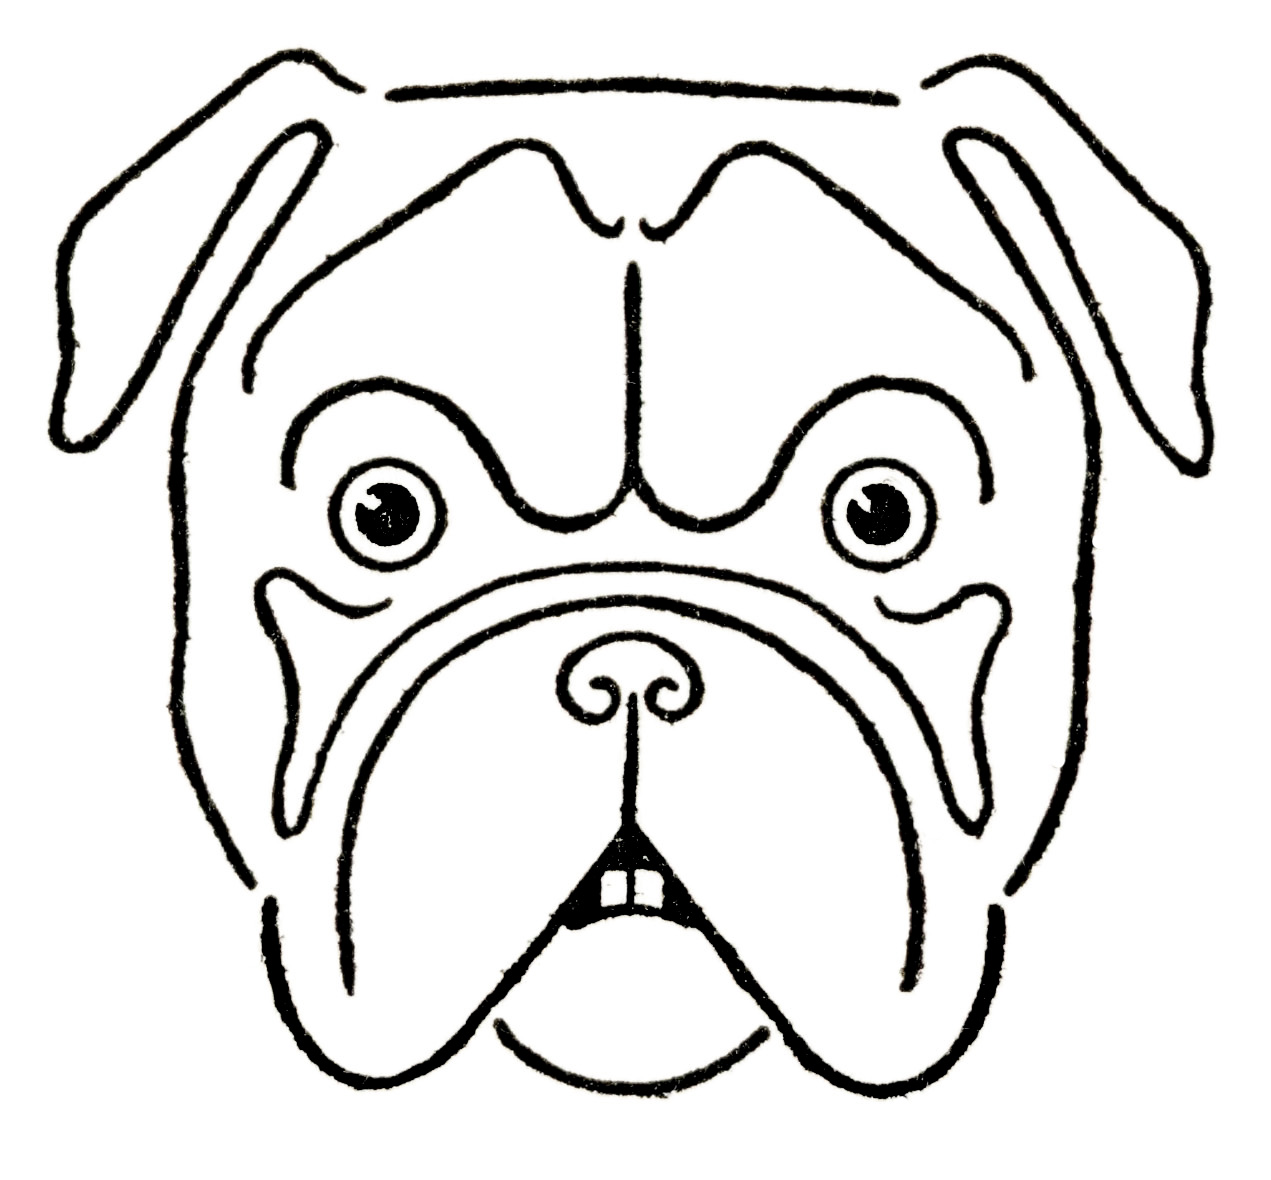 How to Draw a Bulldog Step 7